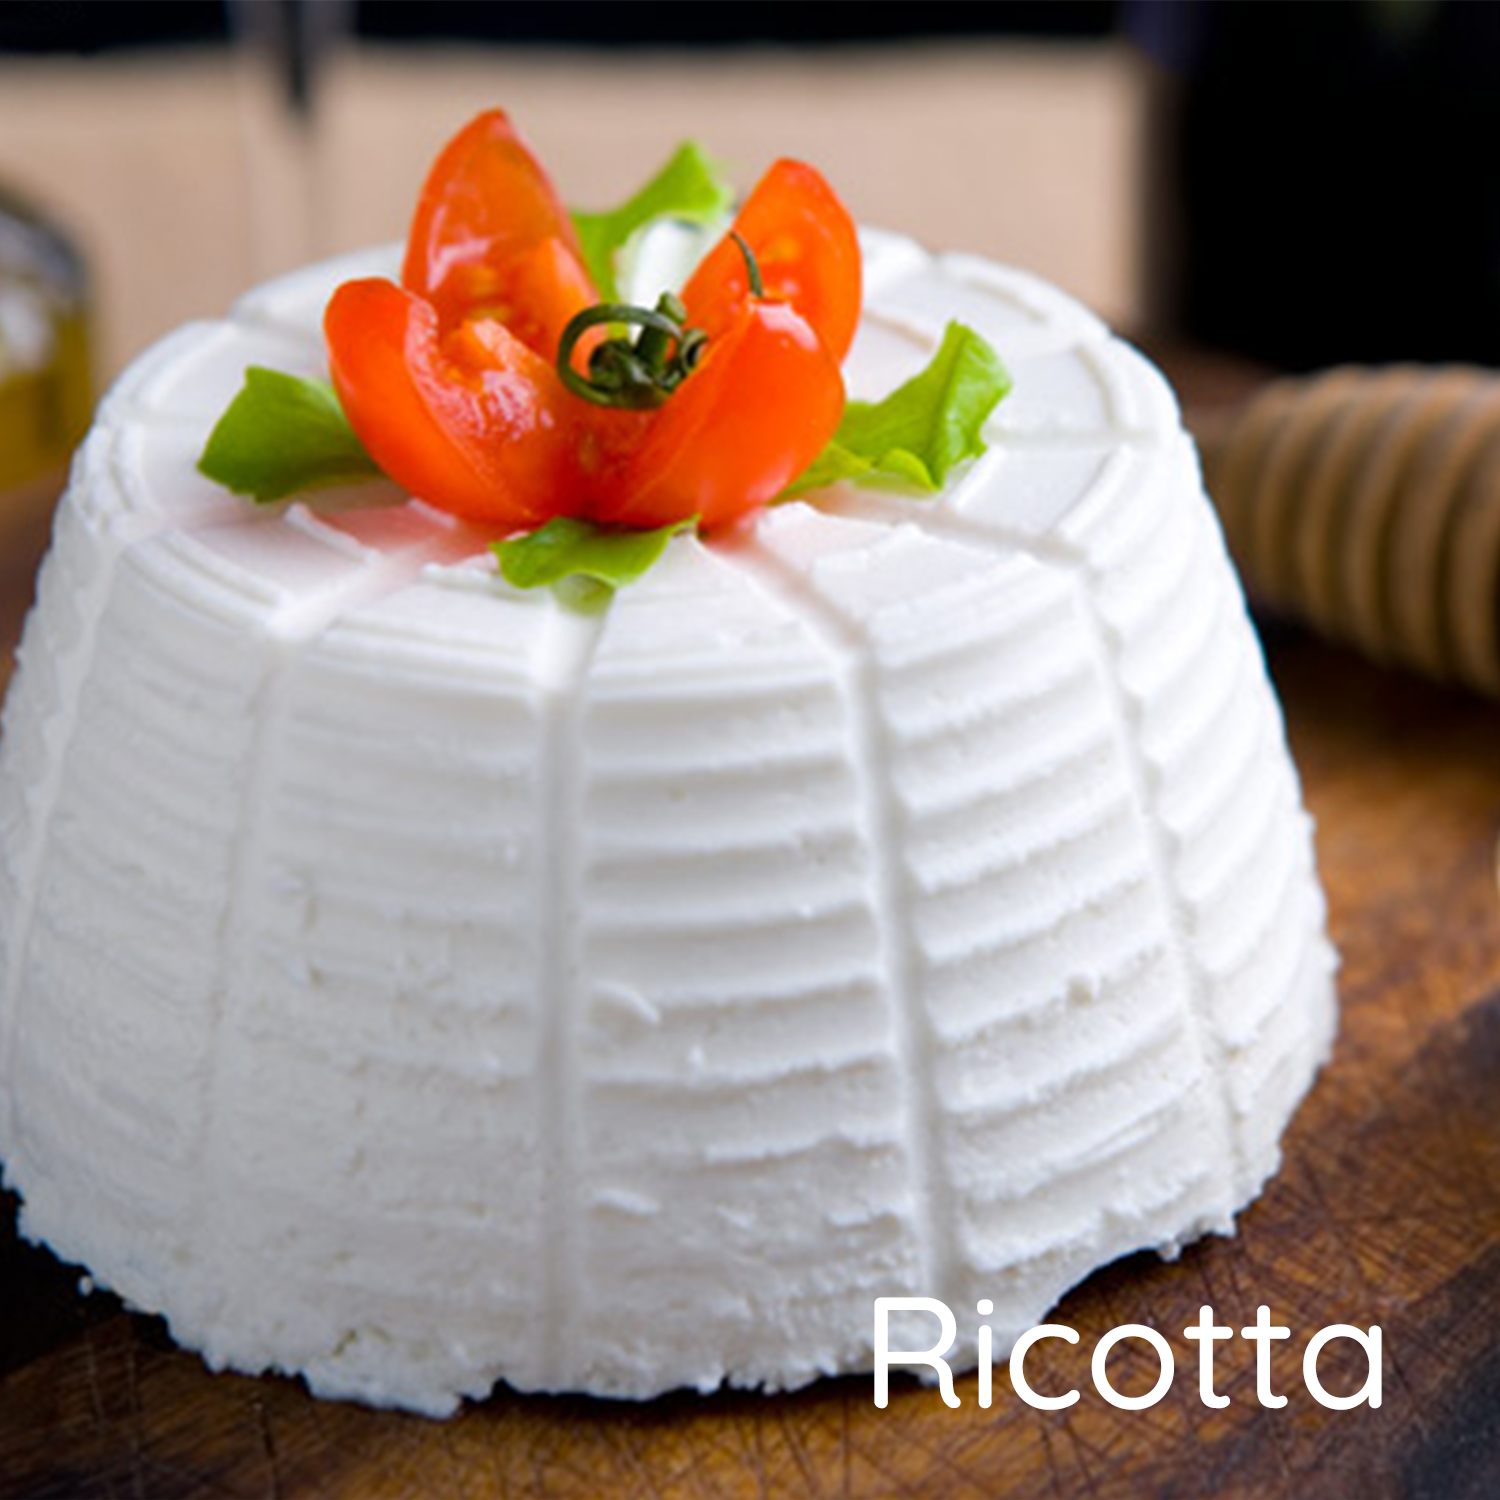 Fromage ricotta maison. Kits pour faire du fromage. Cheese making Kits U MAIN